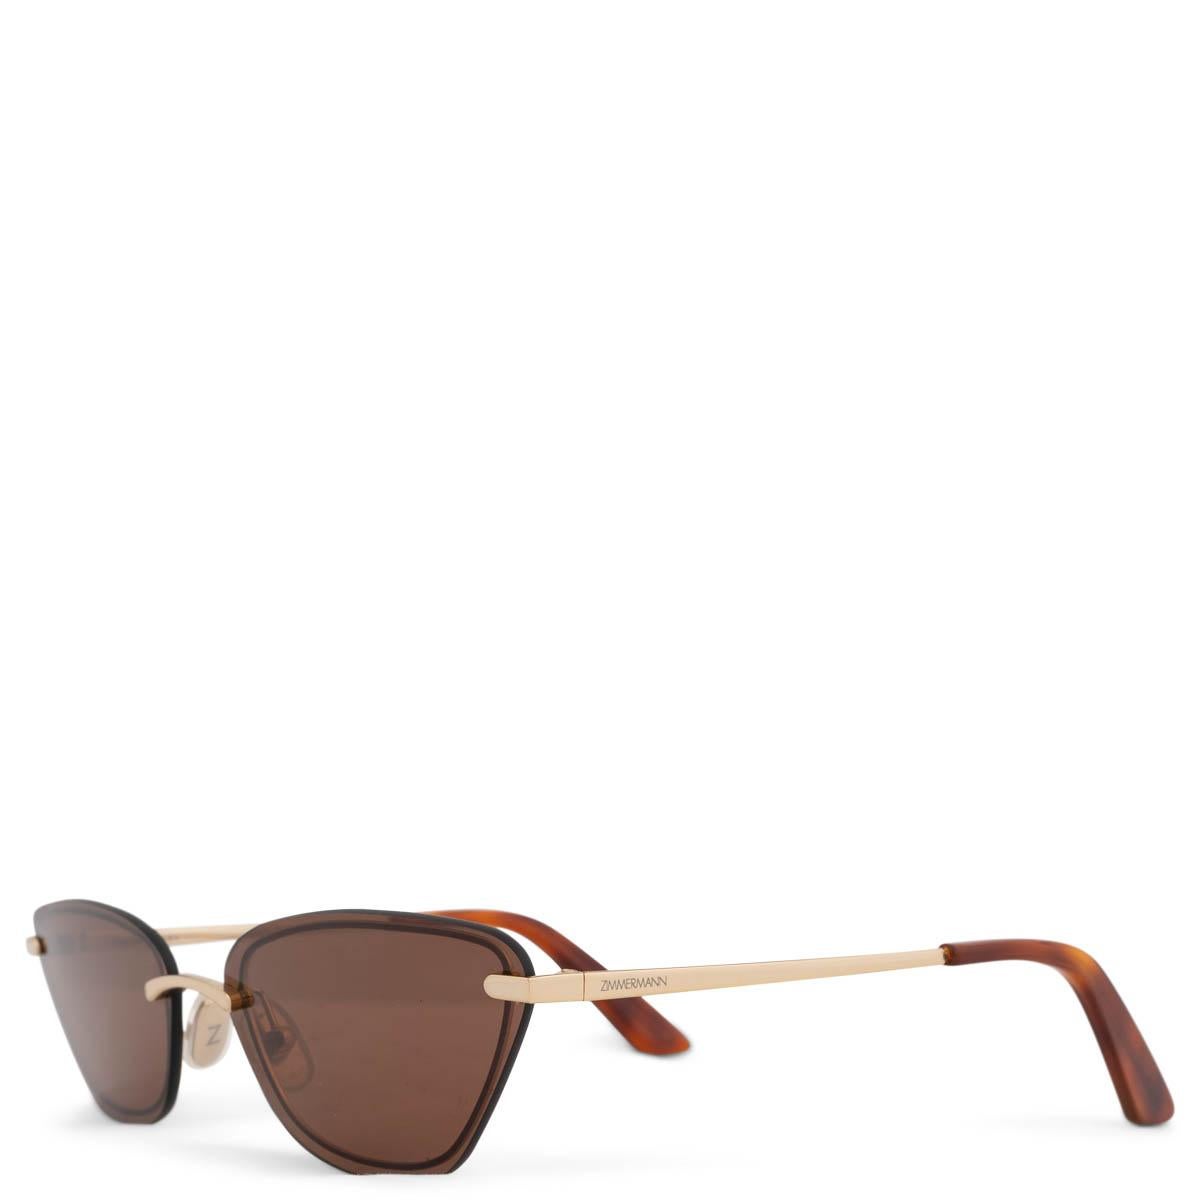 100% authentic Zimmermann Uptempo cat eye sunglasses in Havana brown. A classic cat-eye shape featuring a micro acetate frame and gold-tone temples with tonal lenses. Havana lens is category 2. Has been worn and is in excellent condition. Come with